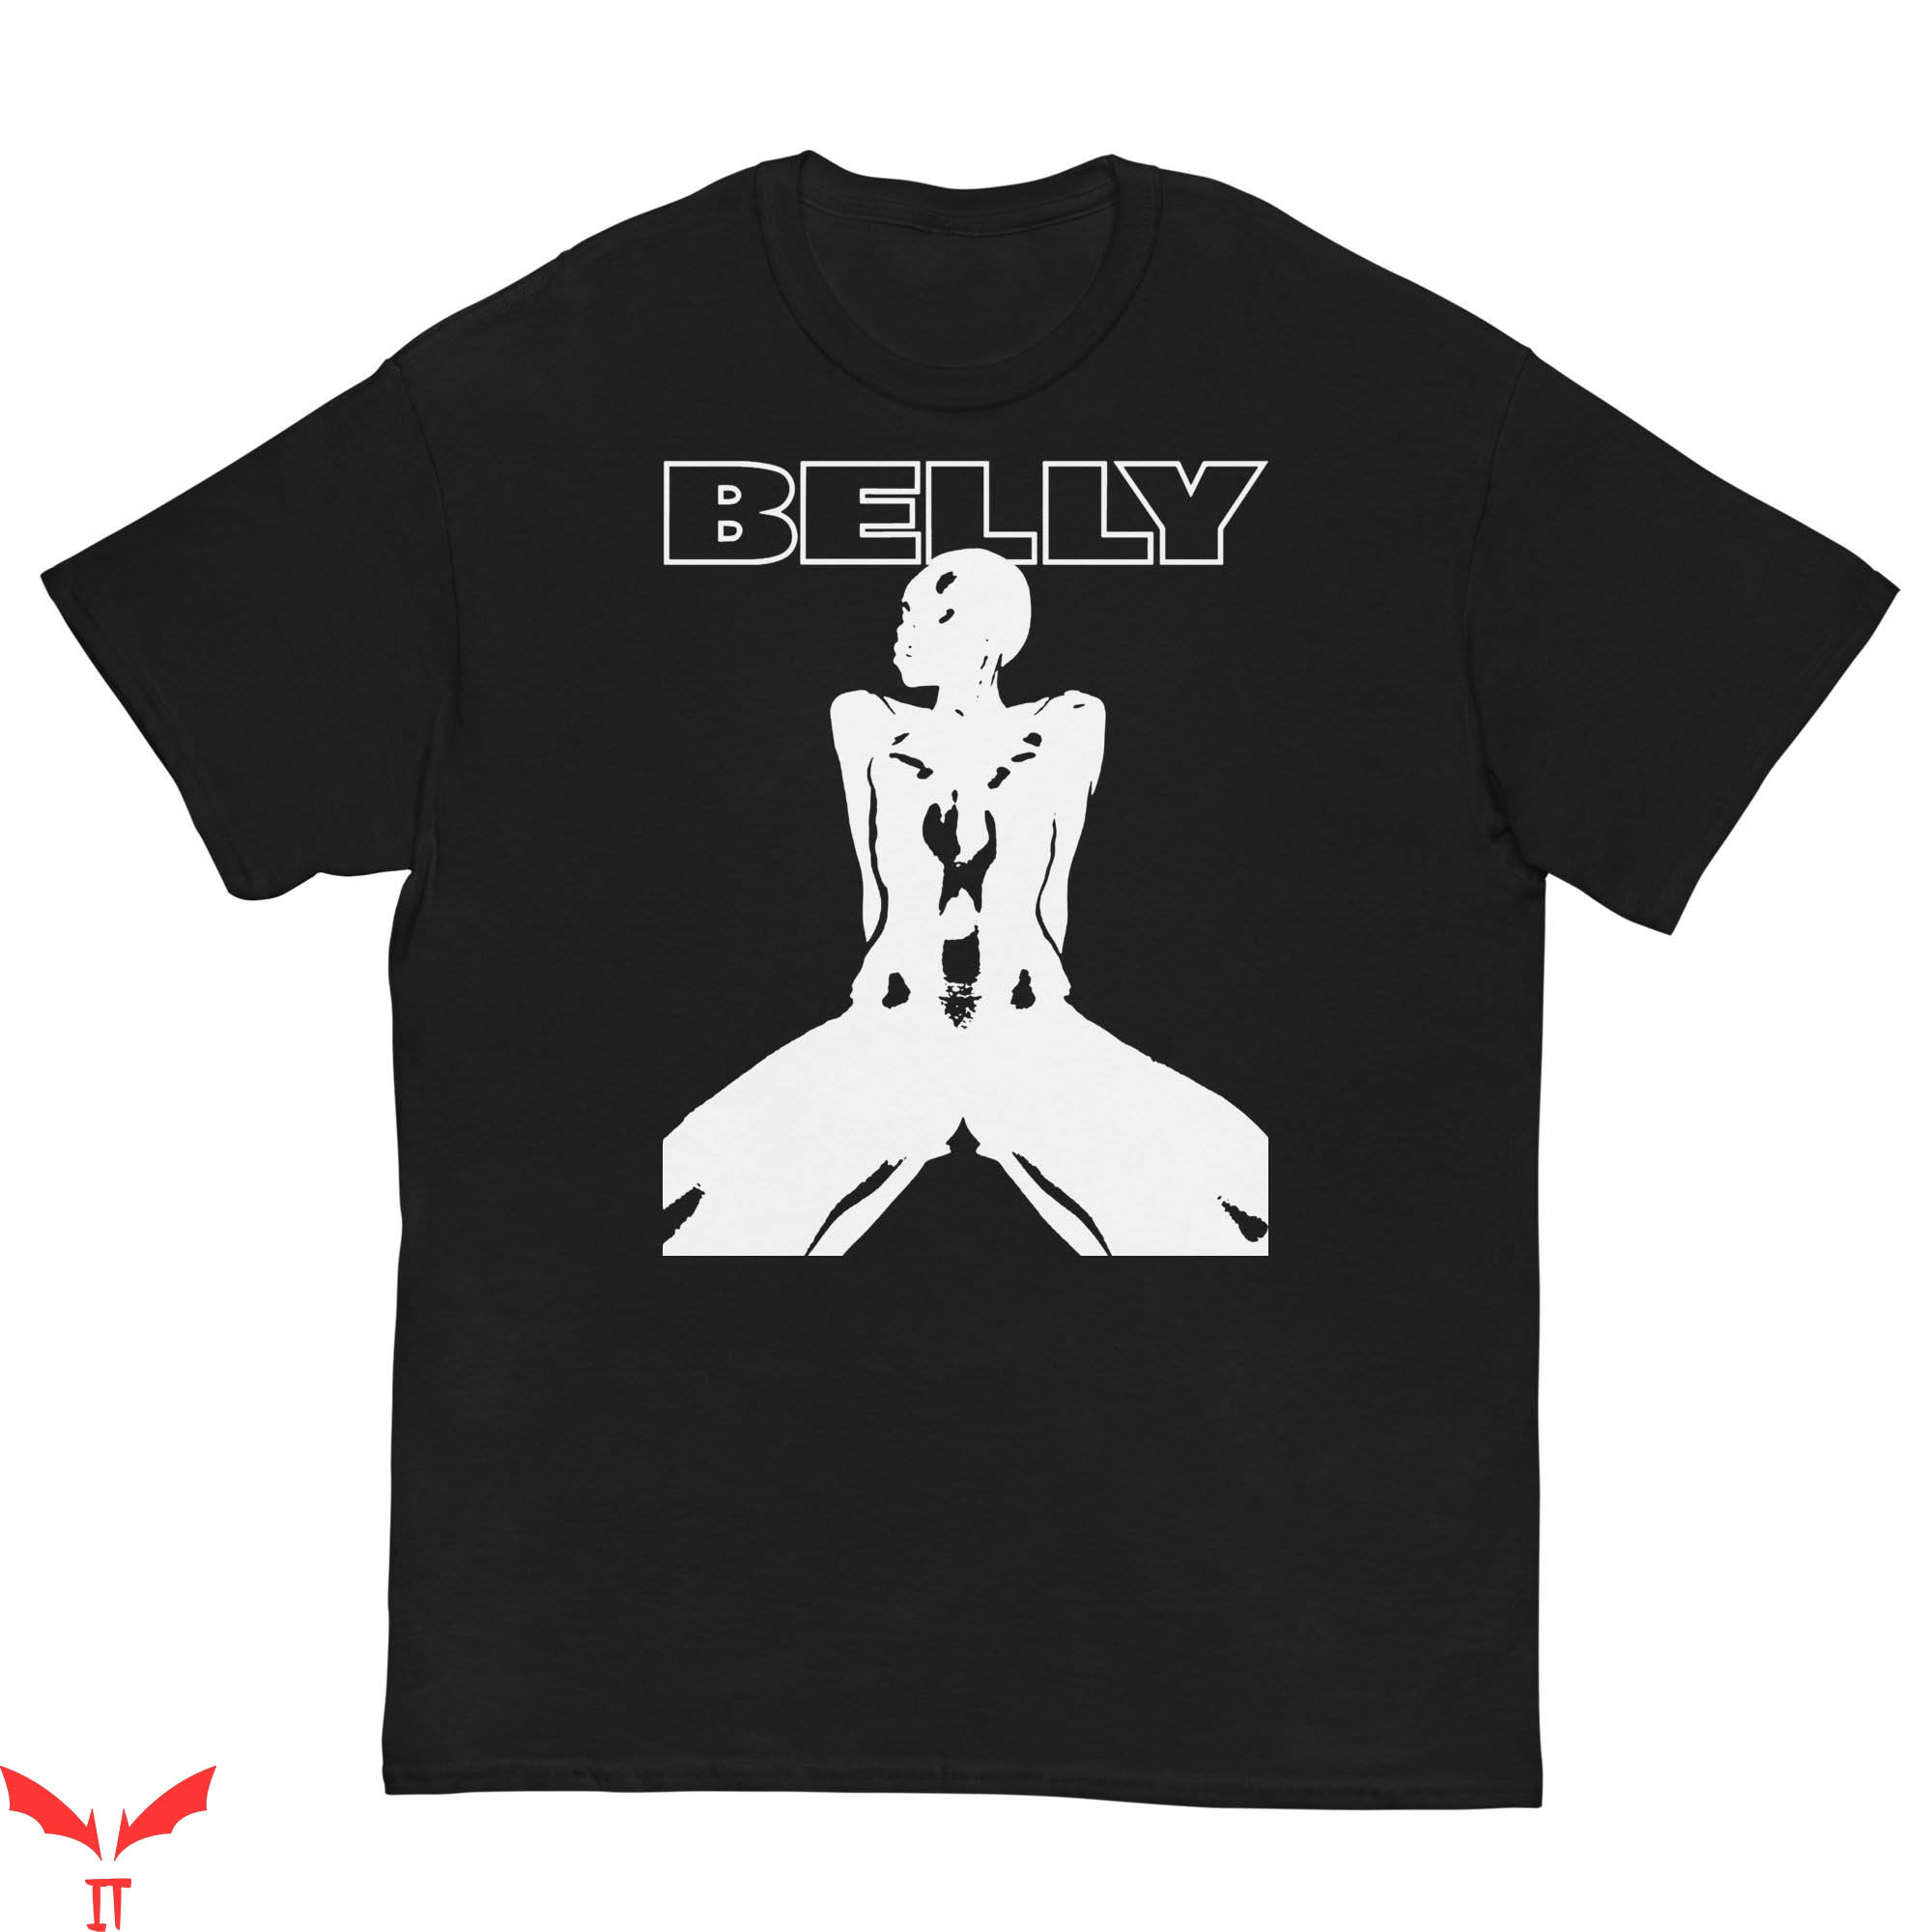 Belly Movie T-Shirt Belly Vintage Hip Hop Movie Poster Tee